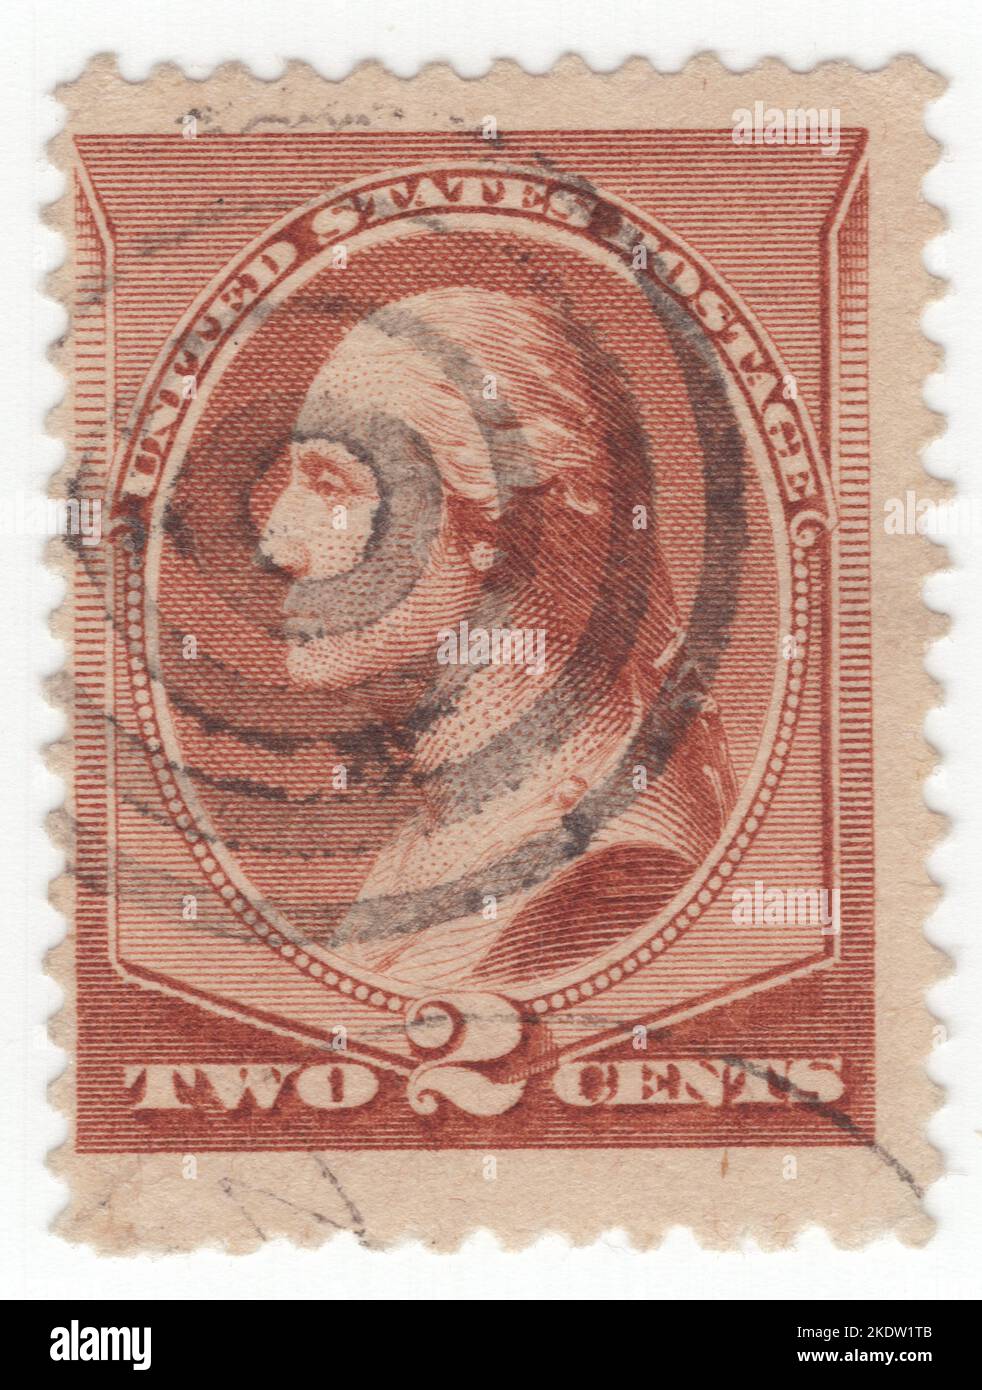 USA - 1883 October 1: An 2 cents red-brown postage stamp depicting portrait of George Washington. American military officer, statesman, and Founding Father who served as the first president of the United States from 1789 to 1797. Appointed by the Continental Congress as commander of the Continental Army, Washington led the Patriot forces to victory in the American Revolutionary War and served as the president of the Constitutional Convention of 1787, which created the Constitution of the United States and the American federal government. Washington has been called the 'Father of his Country' Stock Photo